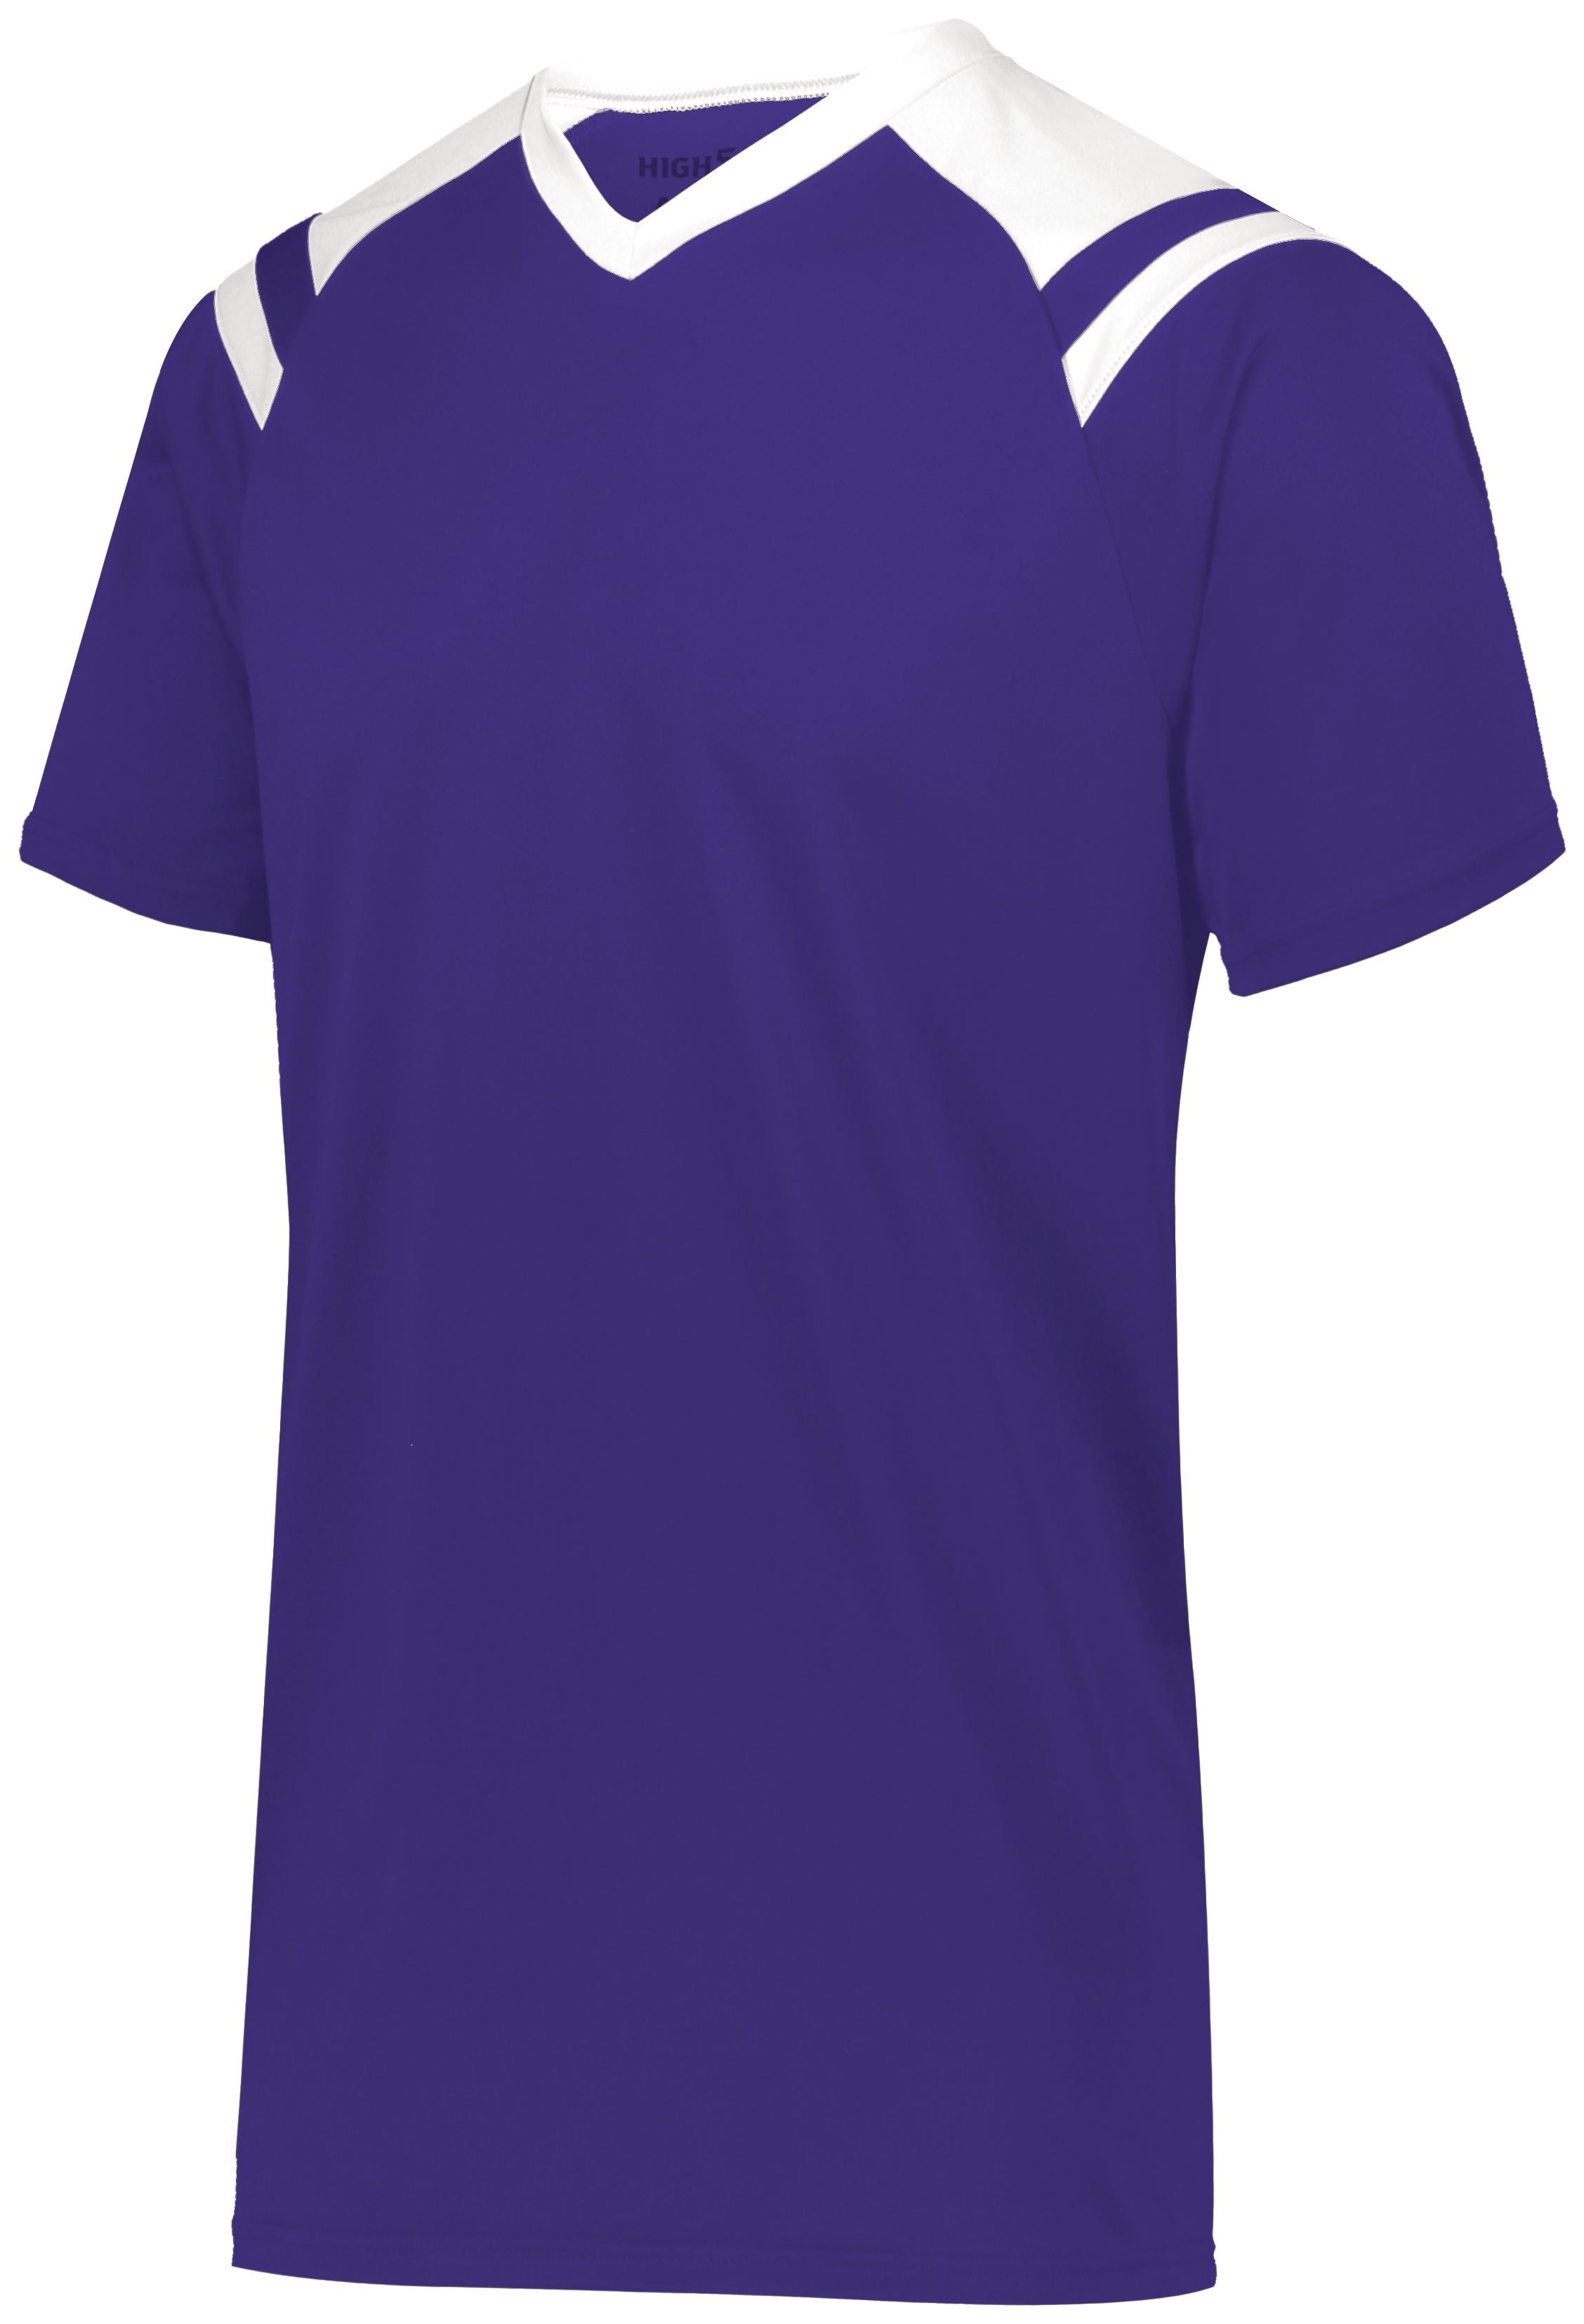 High 5 Youth Sheffield Jersey in Purple/White  -Part of the Youth, Youth-Jersey, High5-Products, Soccer, Shirts, All-Sports-1, Sheffield-Soccer-Jerseys product lines at KanaleyCreations.com